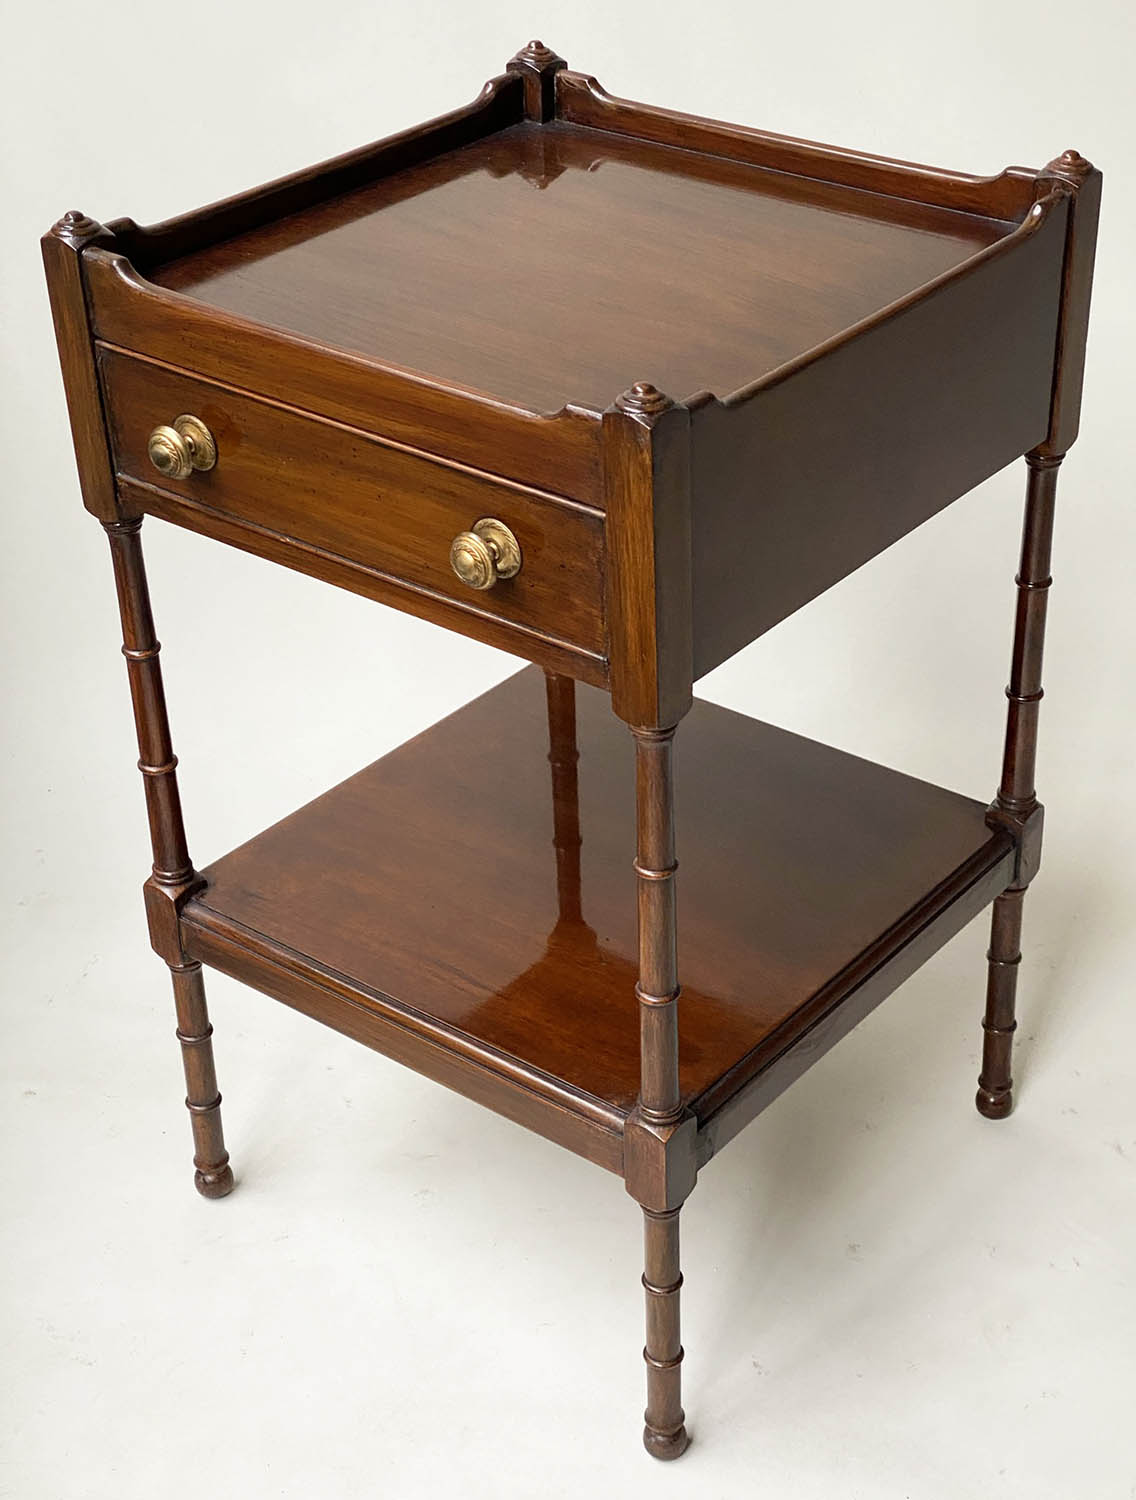 LAMP TABLES, a pair, George III design mahogany, each galleried with frieze drawer and under tier, - Image 3 of 8